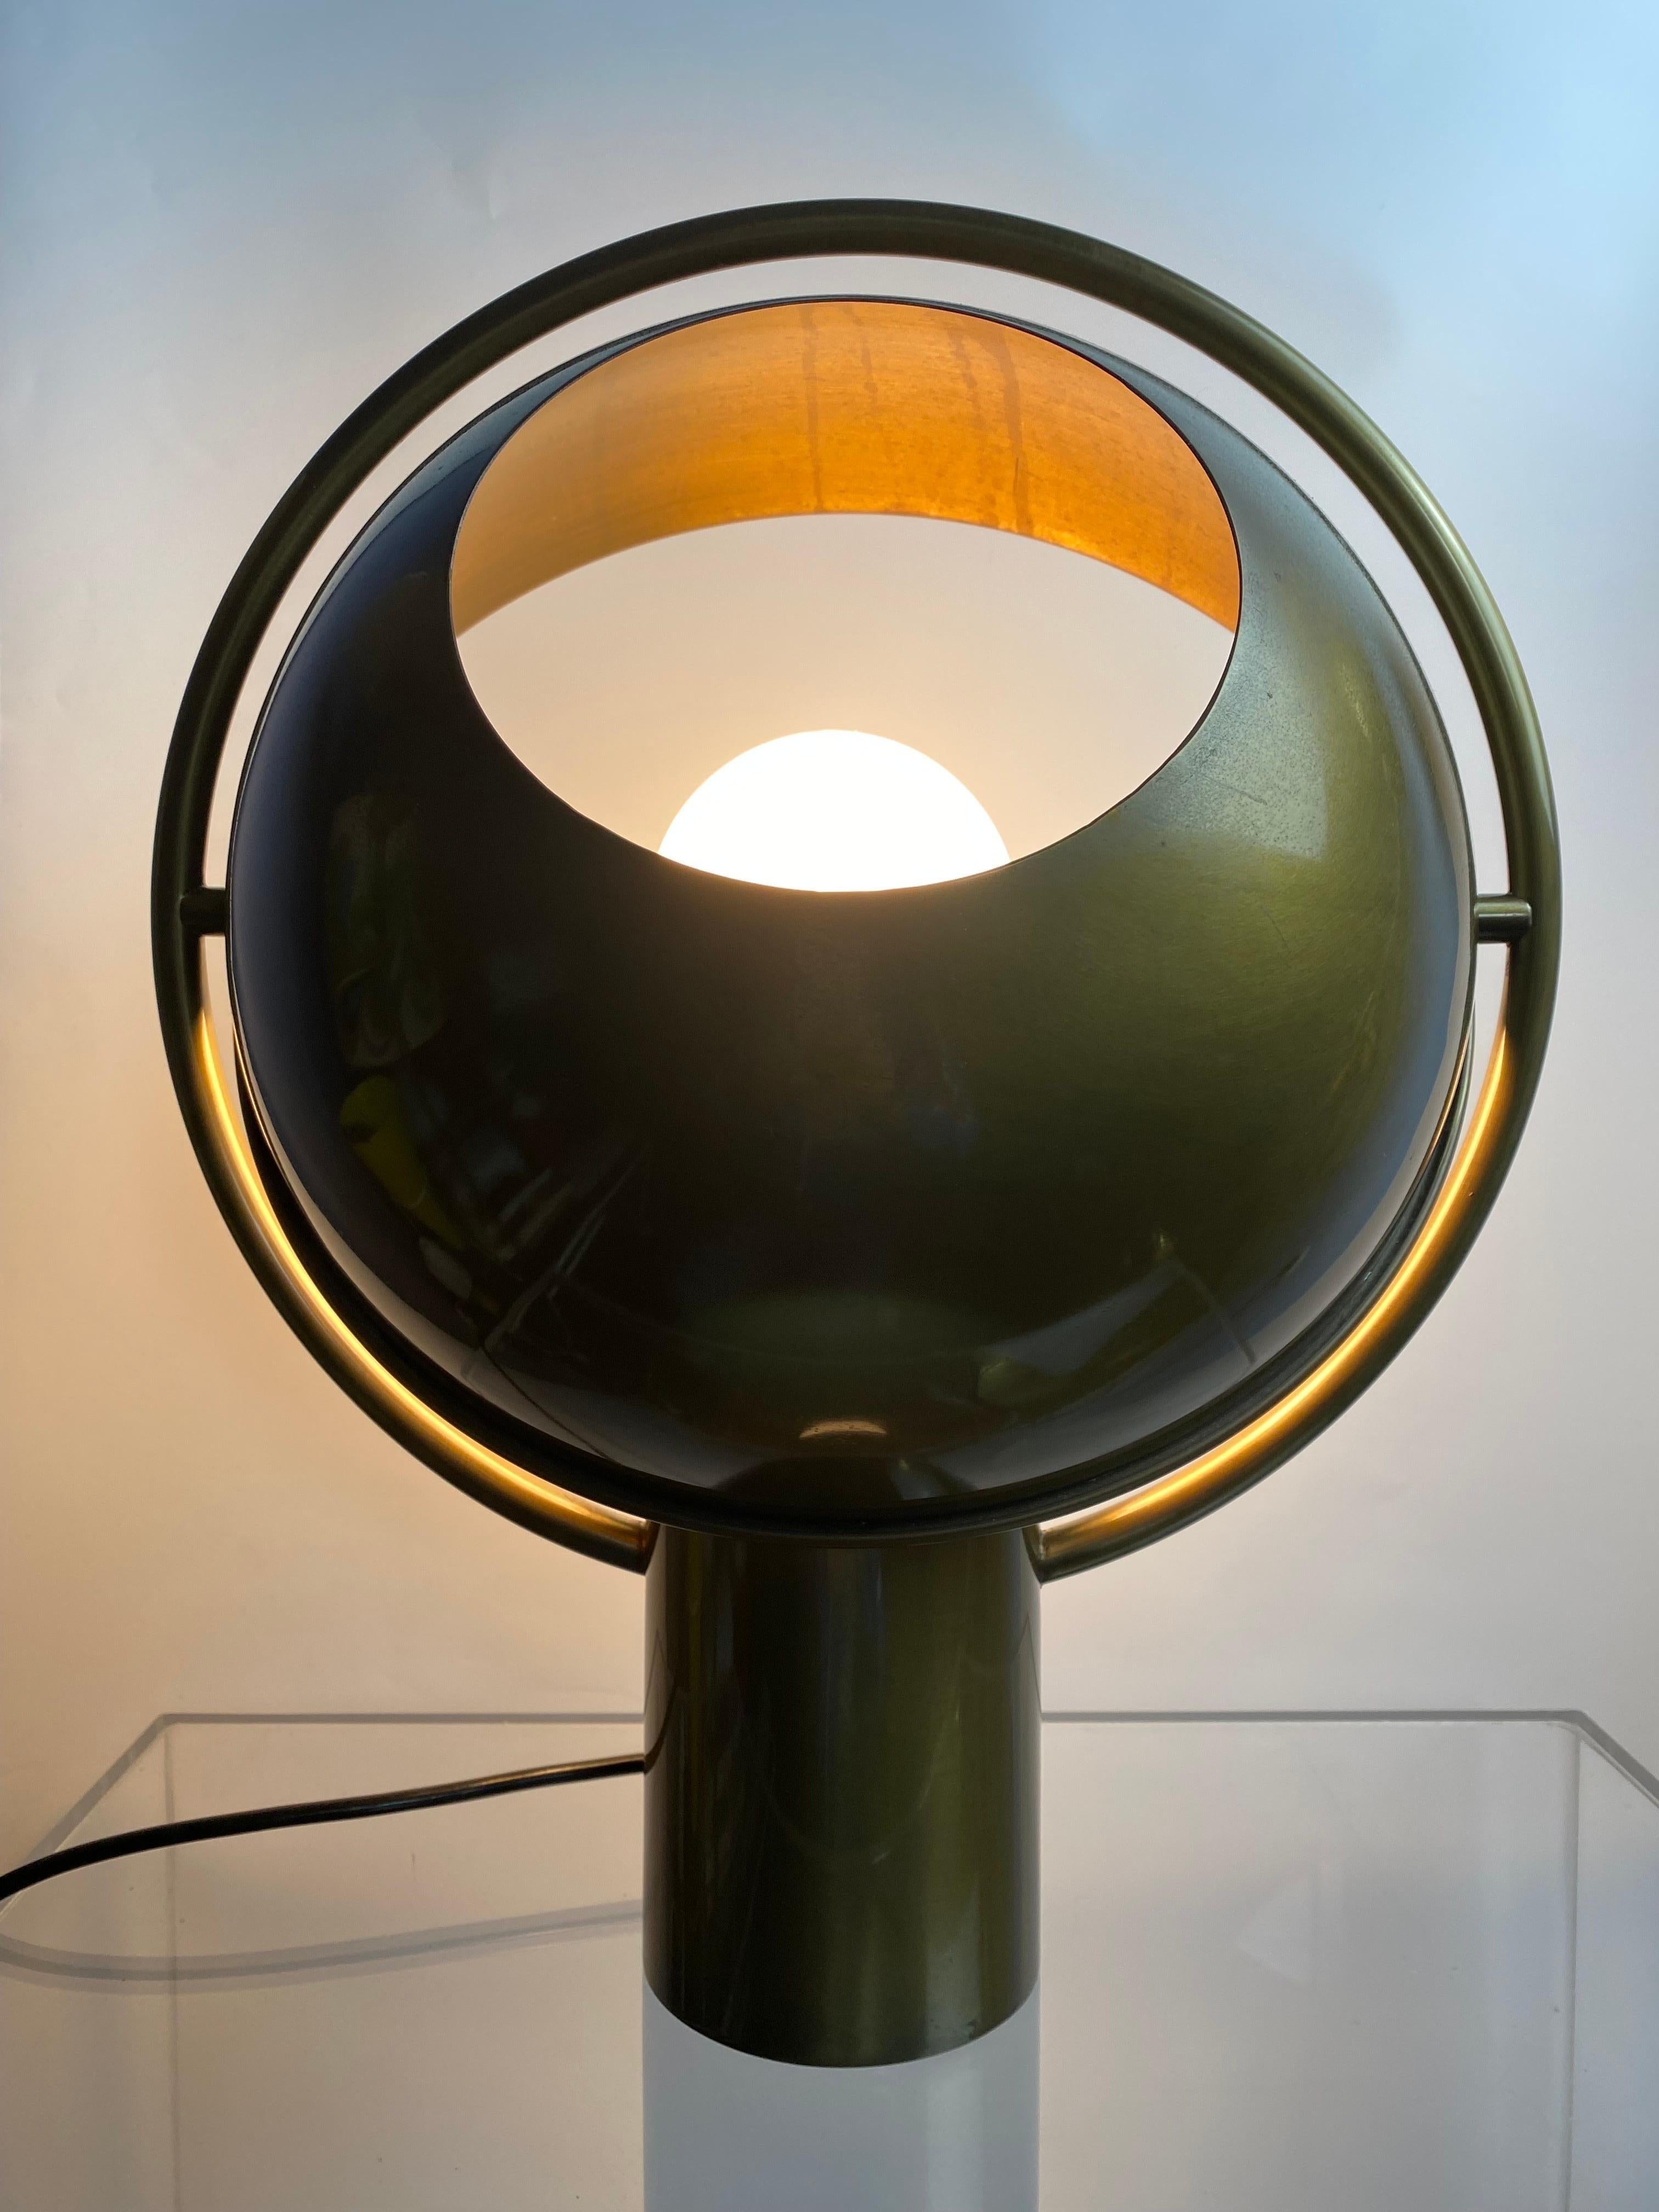 Rare German Midcentury Table Lamp in Solid Brass by Günter&Florian Schulz 1970s For Sale 8